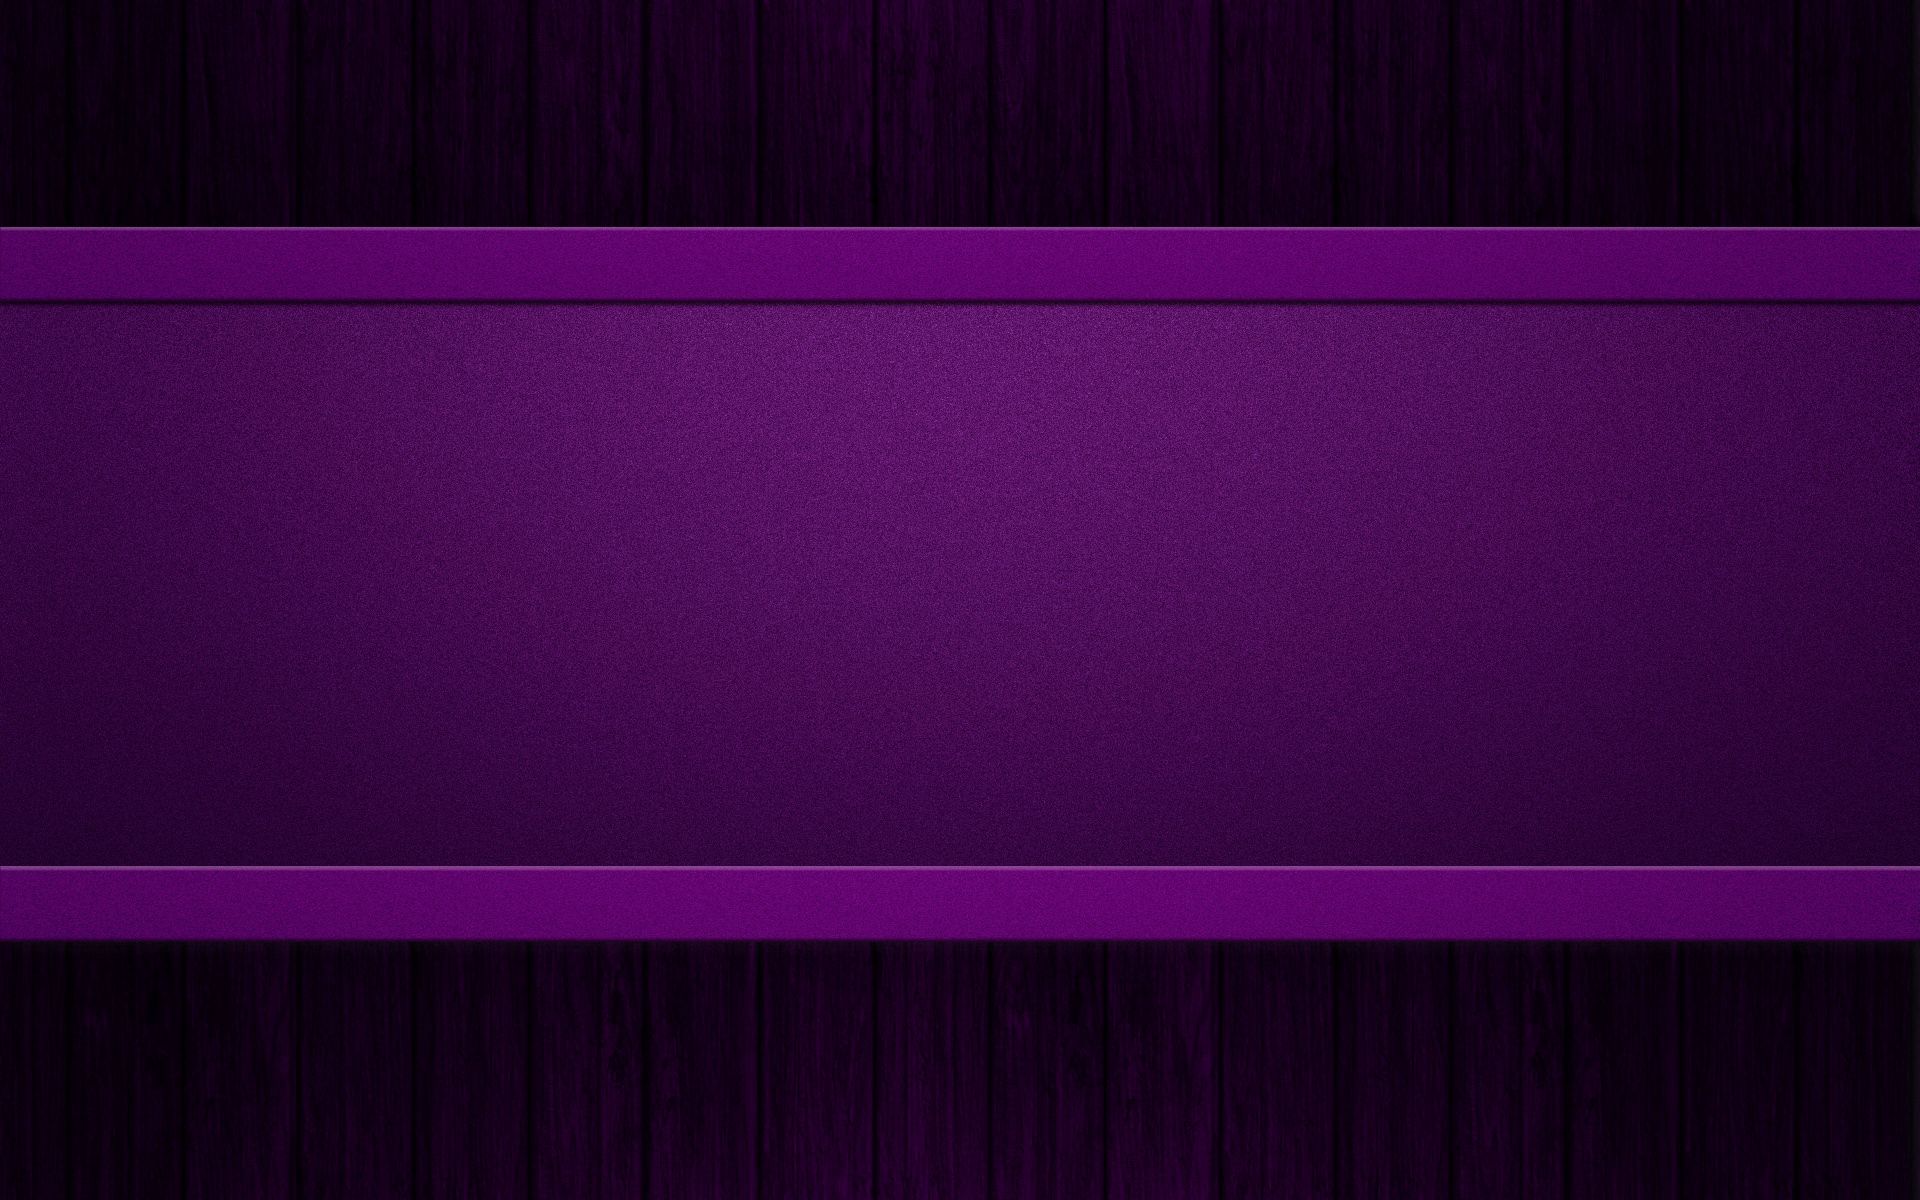 78222 download wallpaper streaks, stripes, texture, textures, purple background screensavers and pictures for free